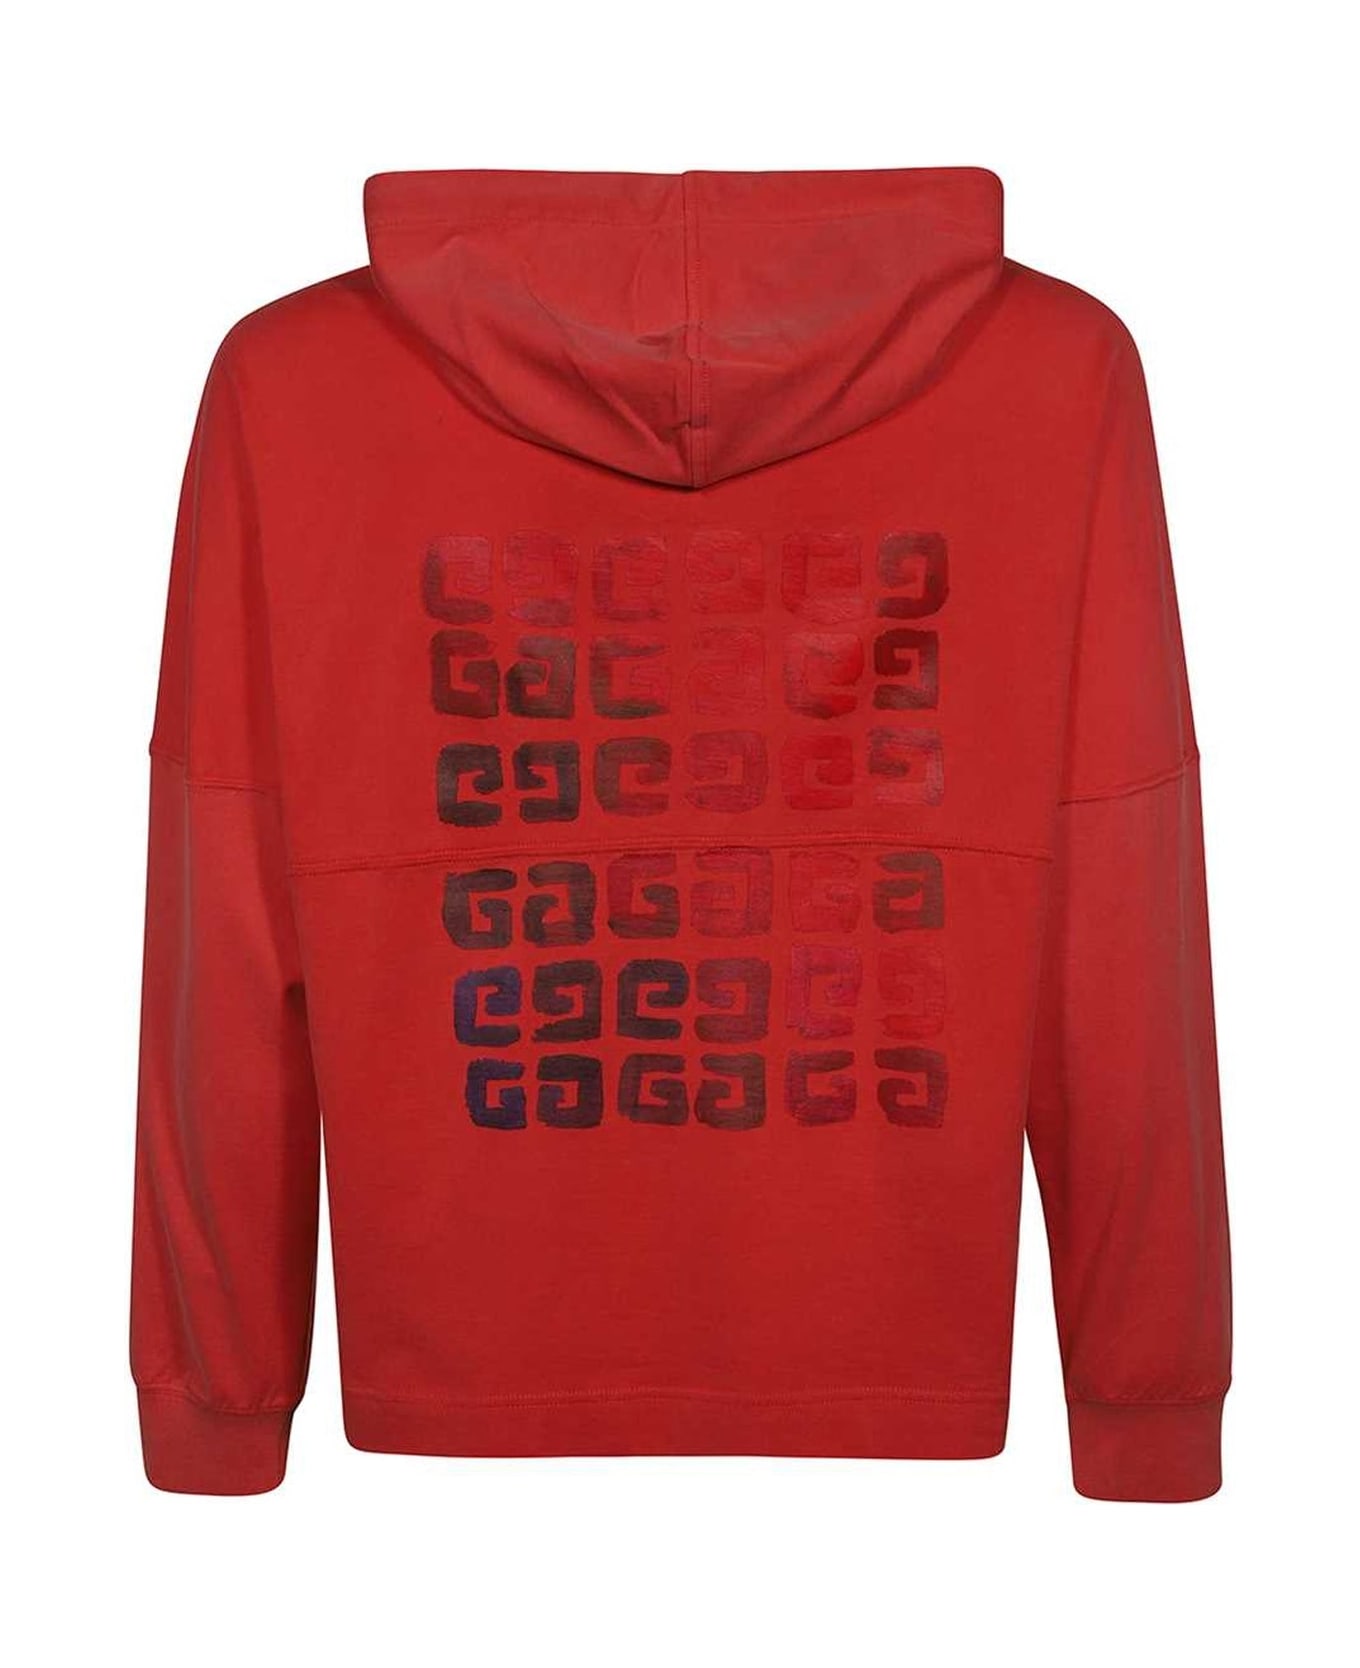 Givenchy Cotton Hooded Sweatshirt - Red